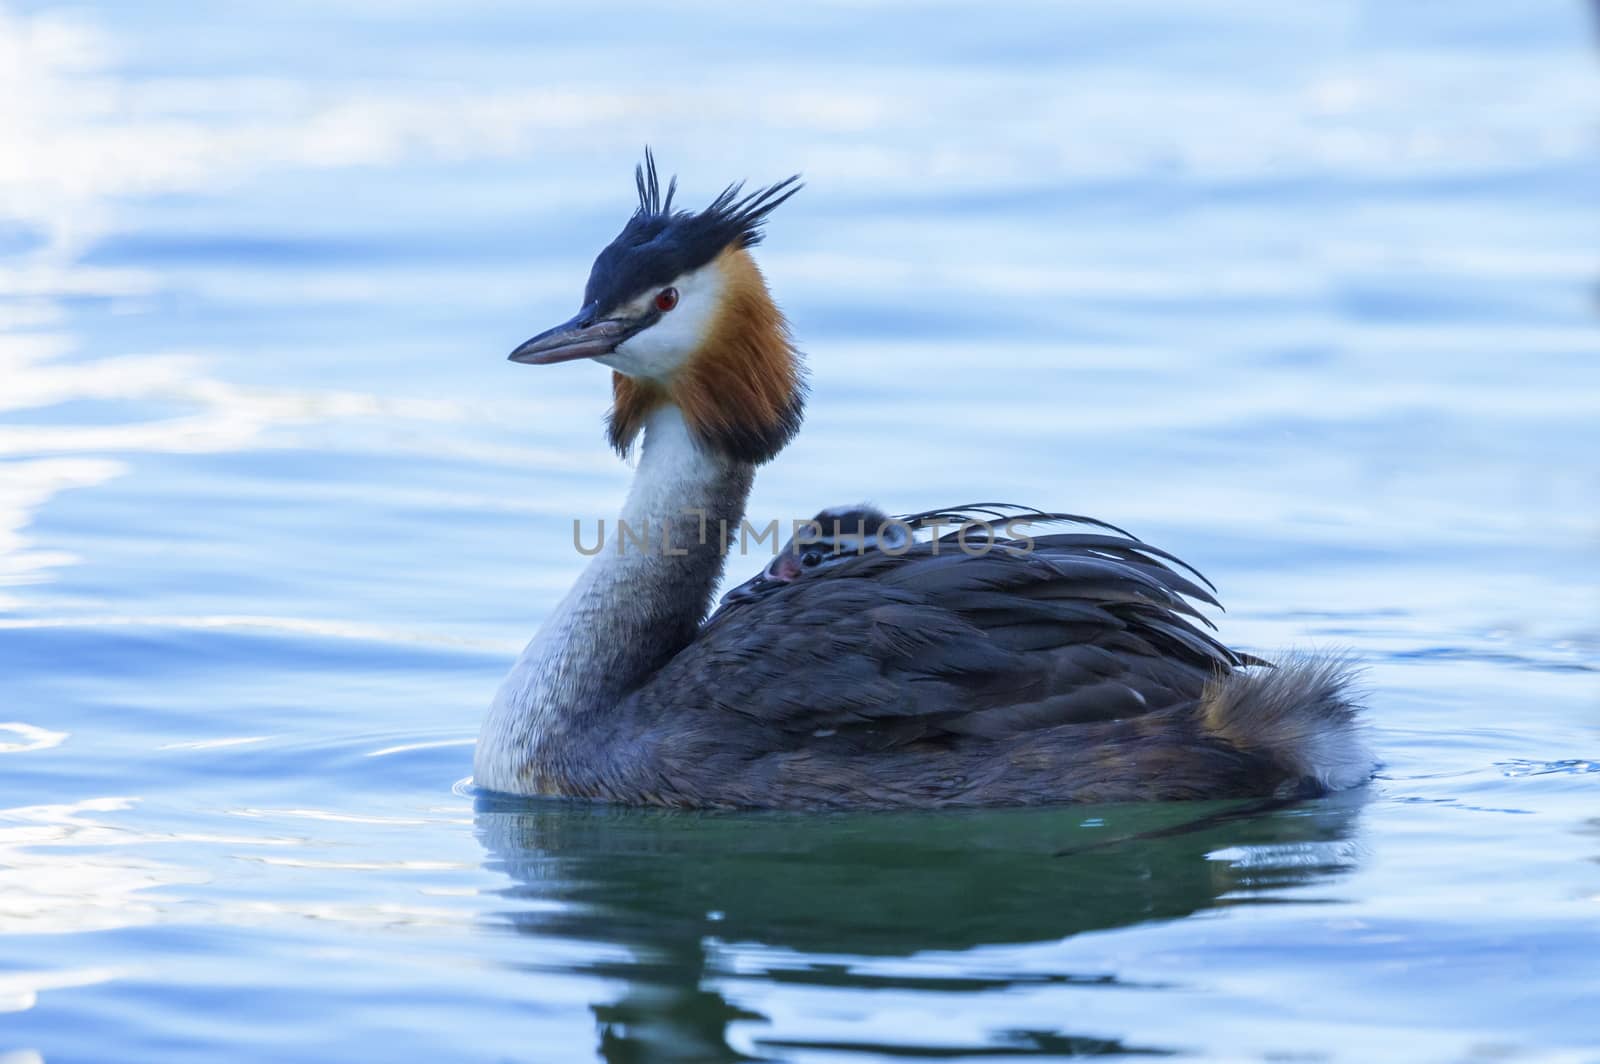 Crested grebe duck, podiceps cristatus, and baby on the back floating on water lake